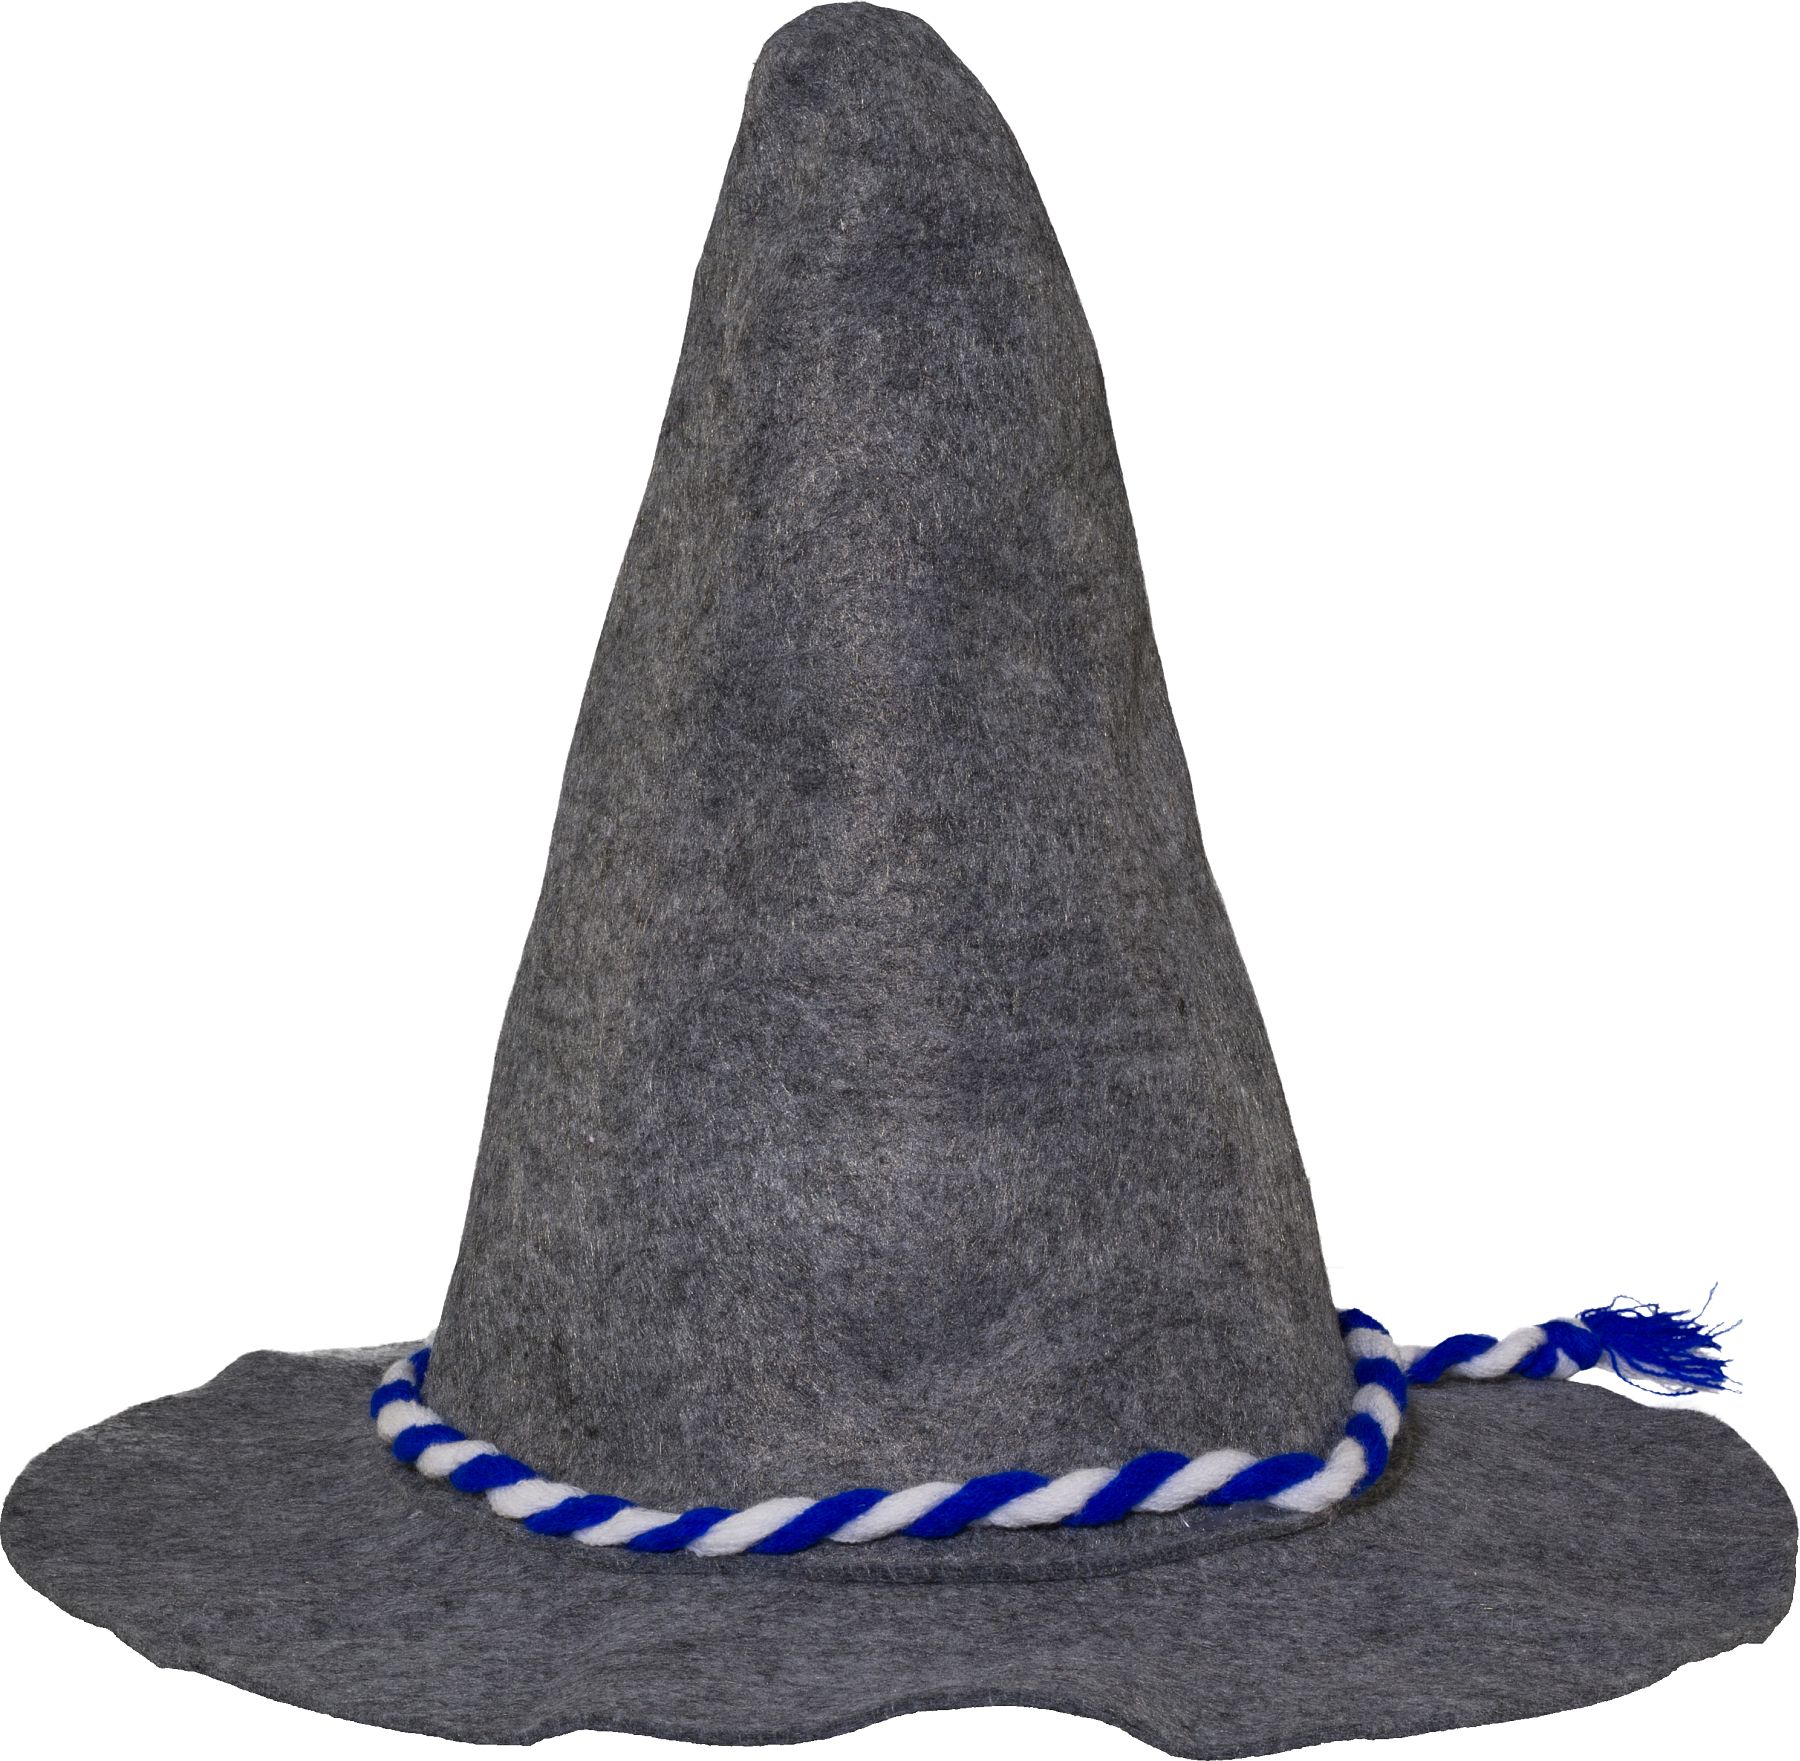 Bavarian hat with blue/white cord